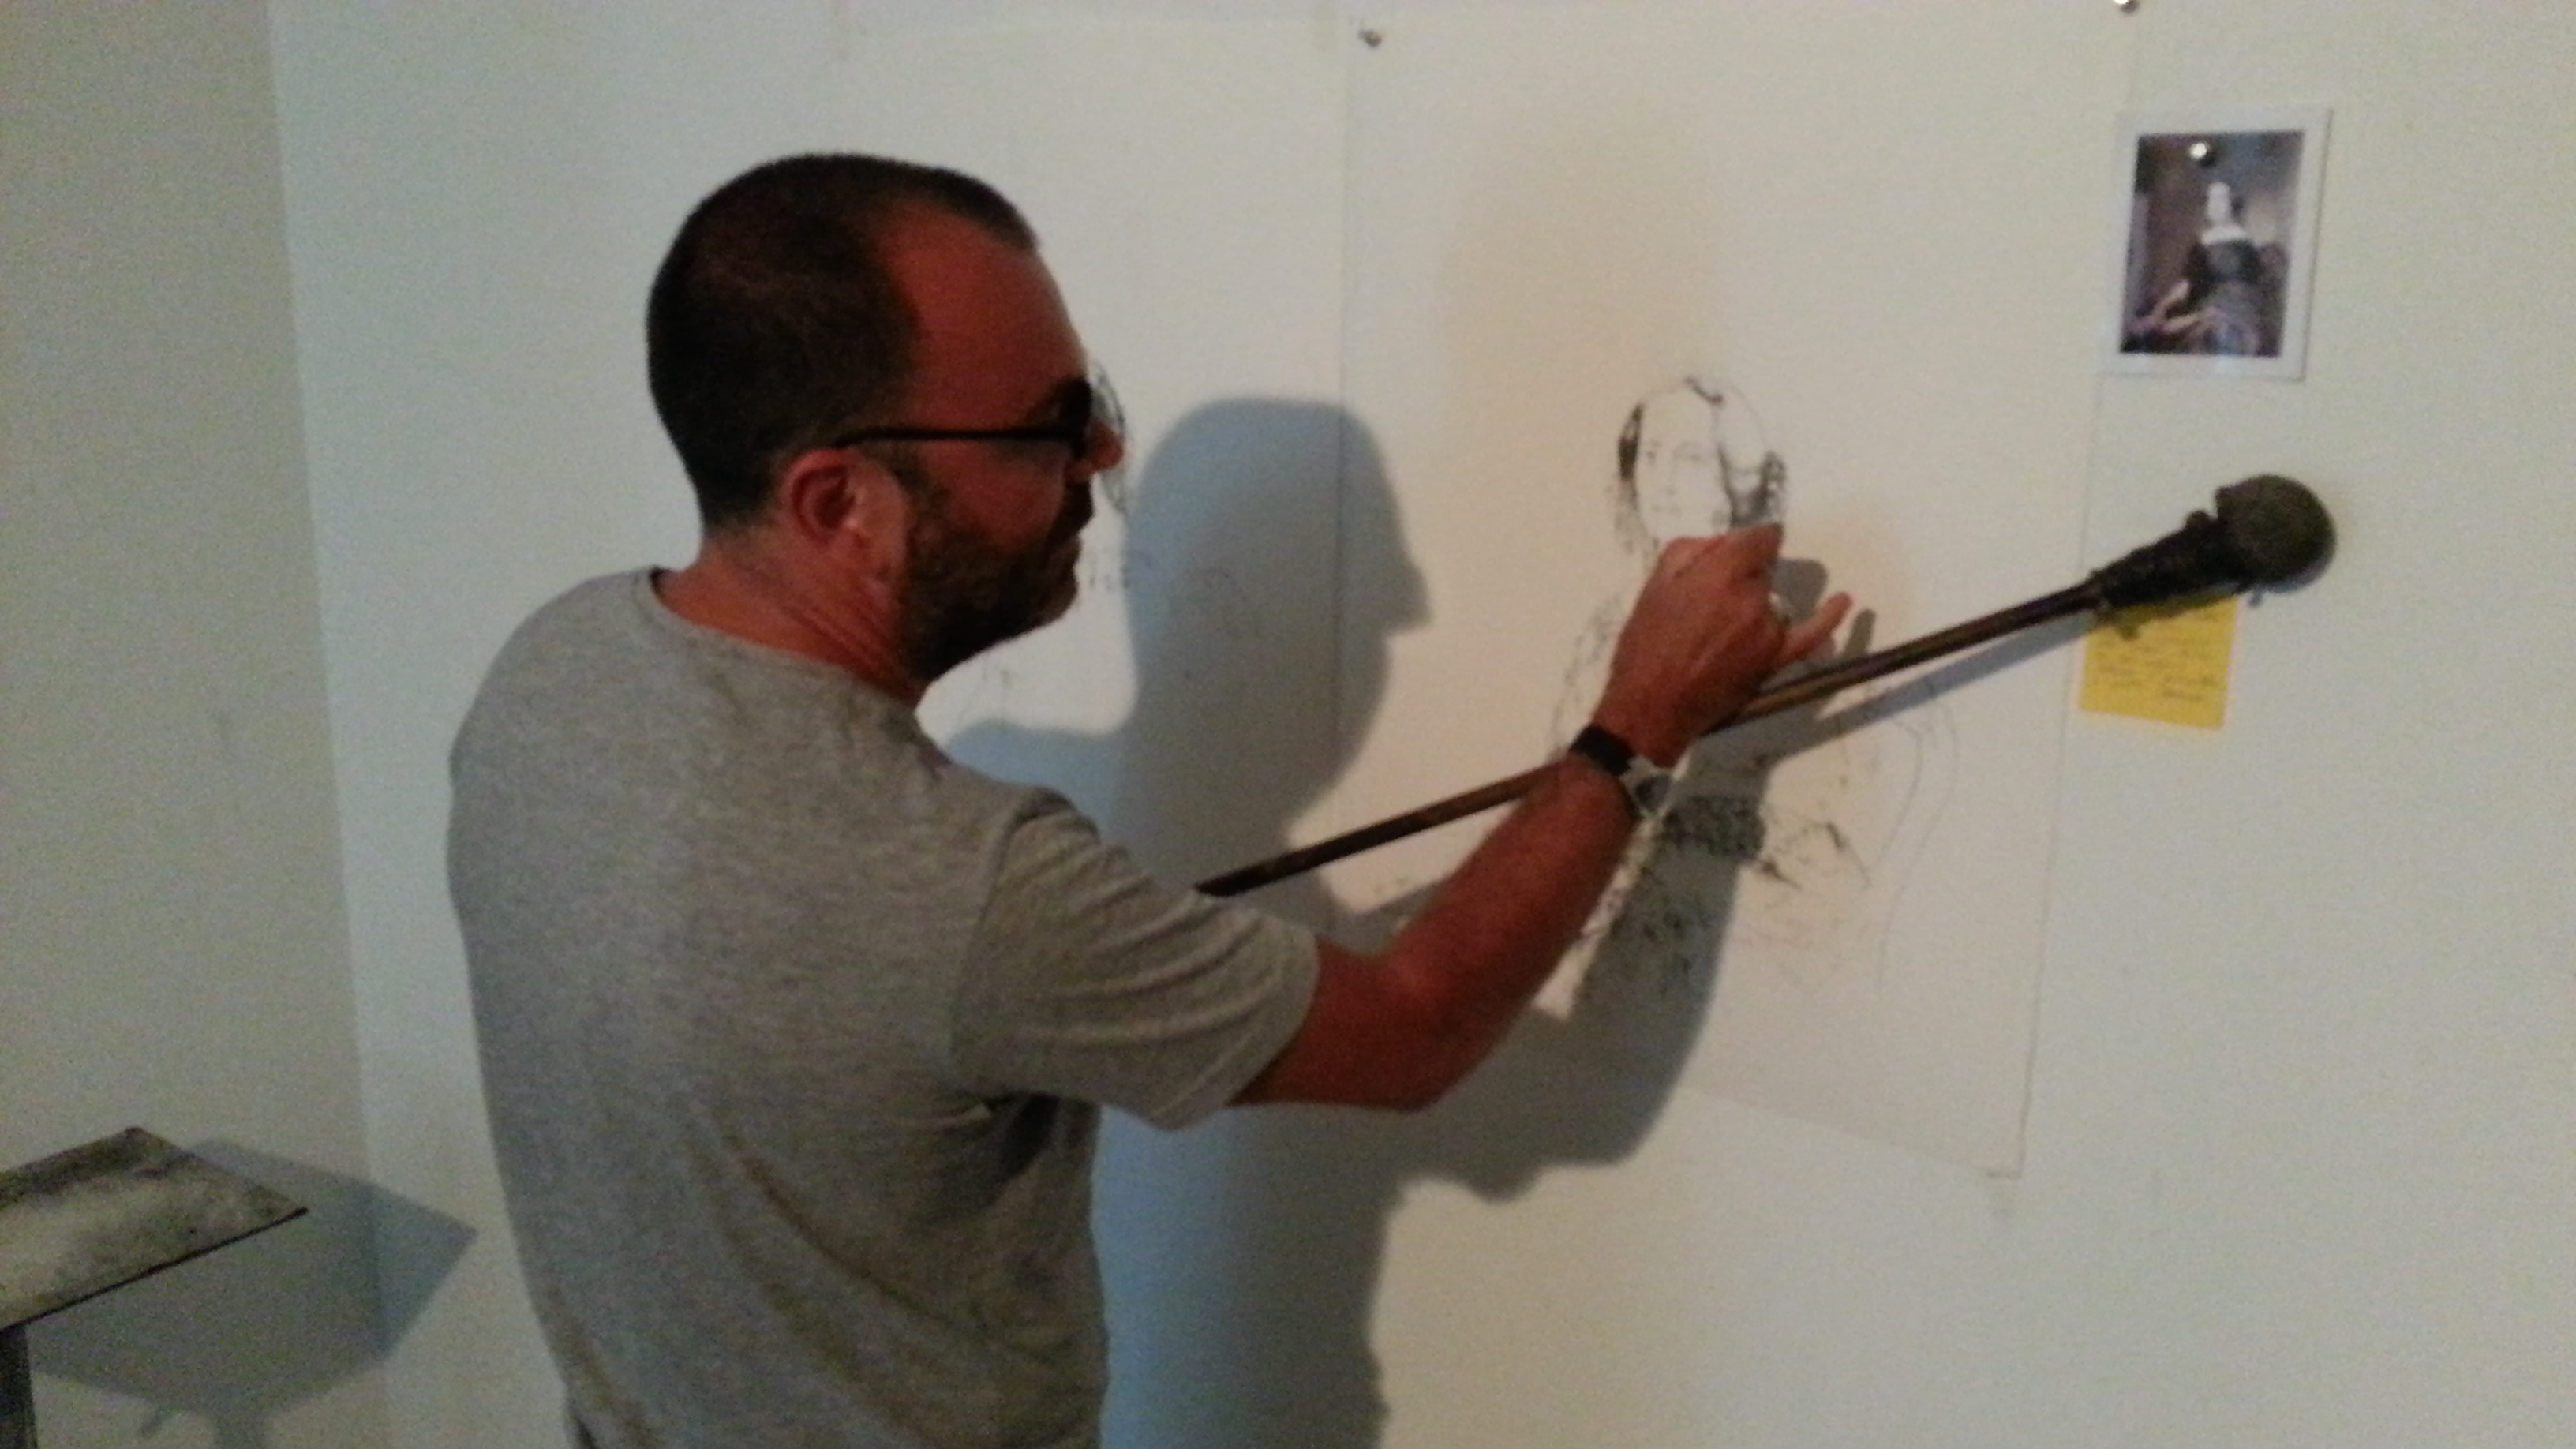 Roig creates a drawing using a hand-made implement to steady his hand during the elaborate sketching.